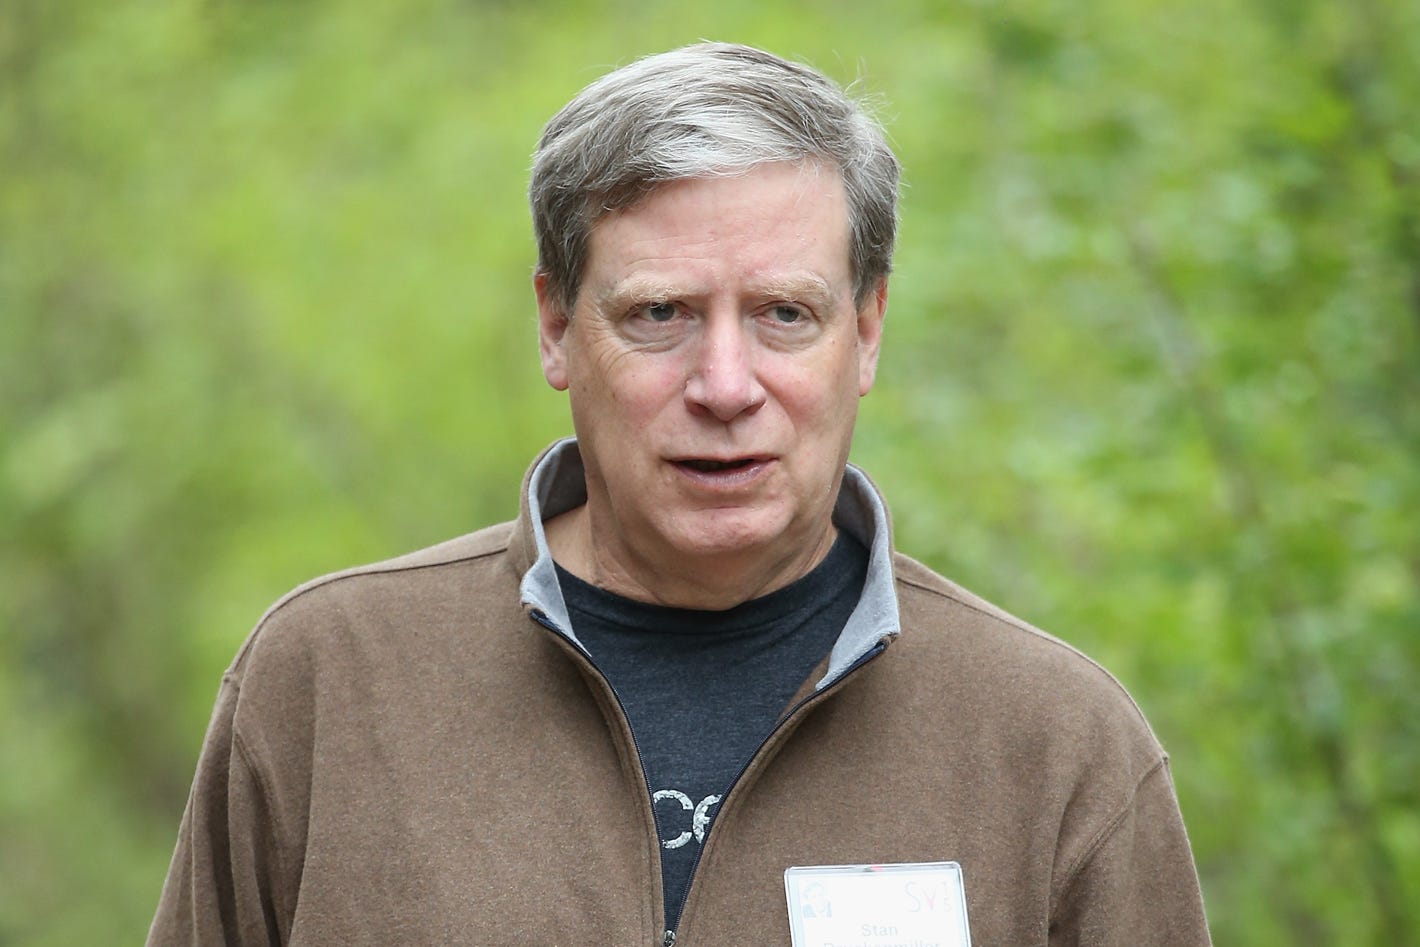 What We're Getting Wrong About Druckenmiller and Bitcoin - CoinDesk